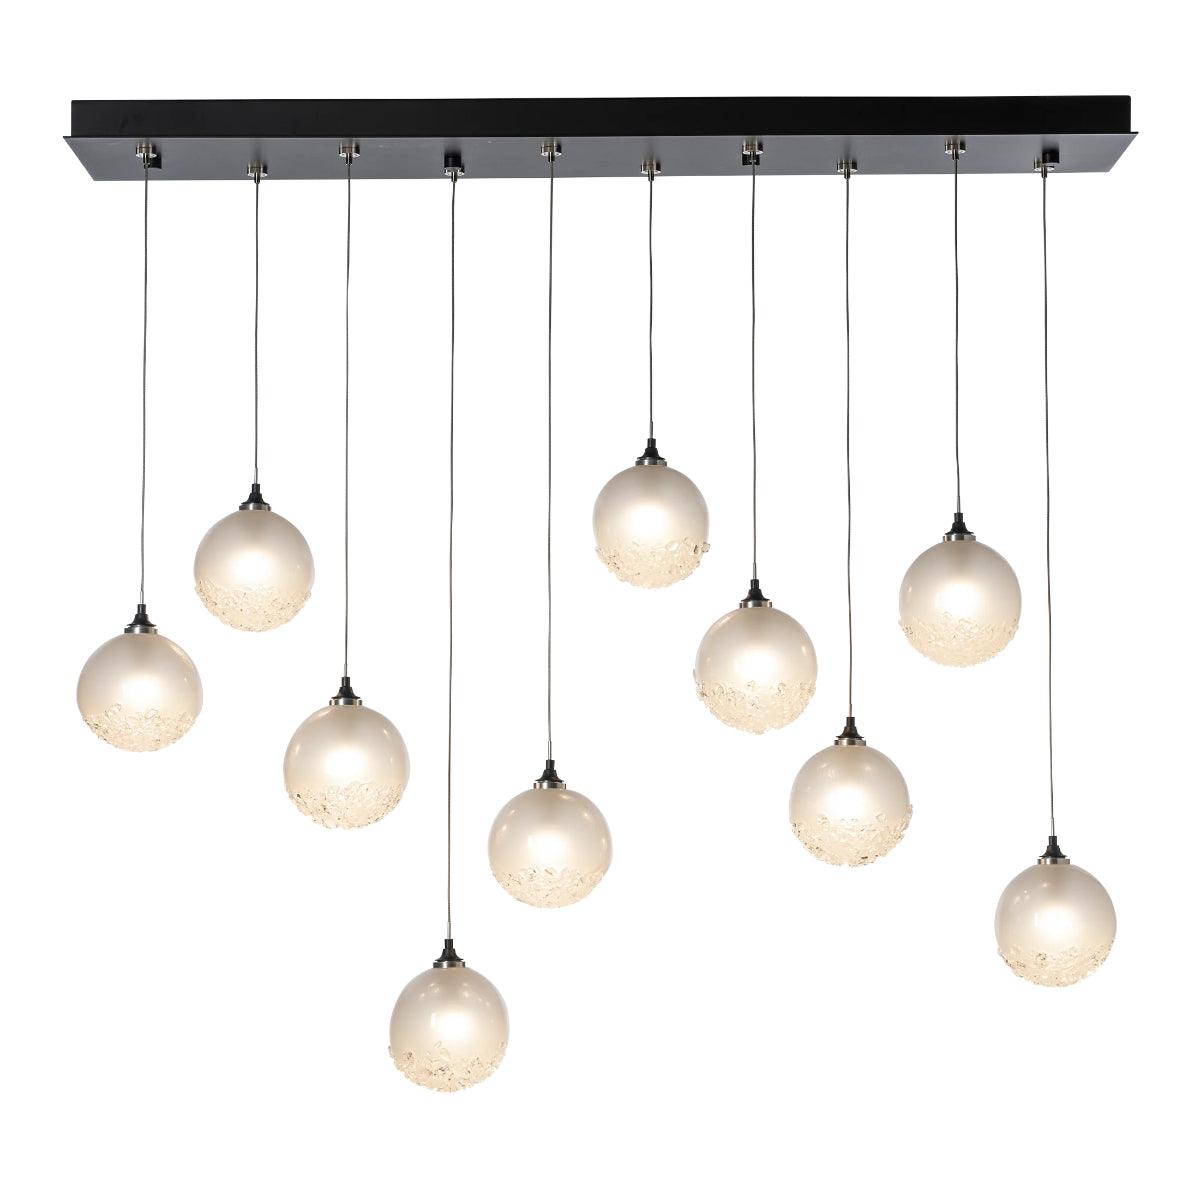 Fritz 45 in. 10 lights Linear Pendant Light with Standard Height